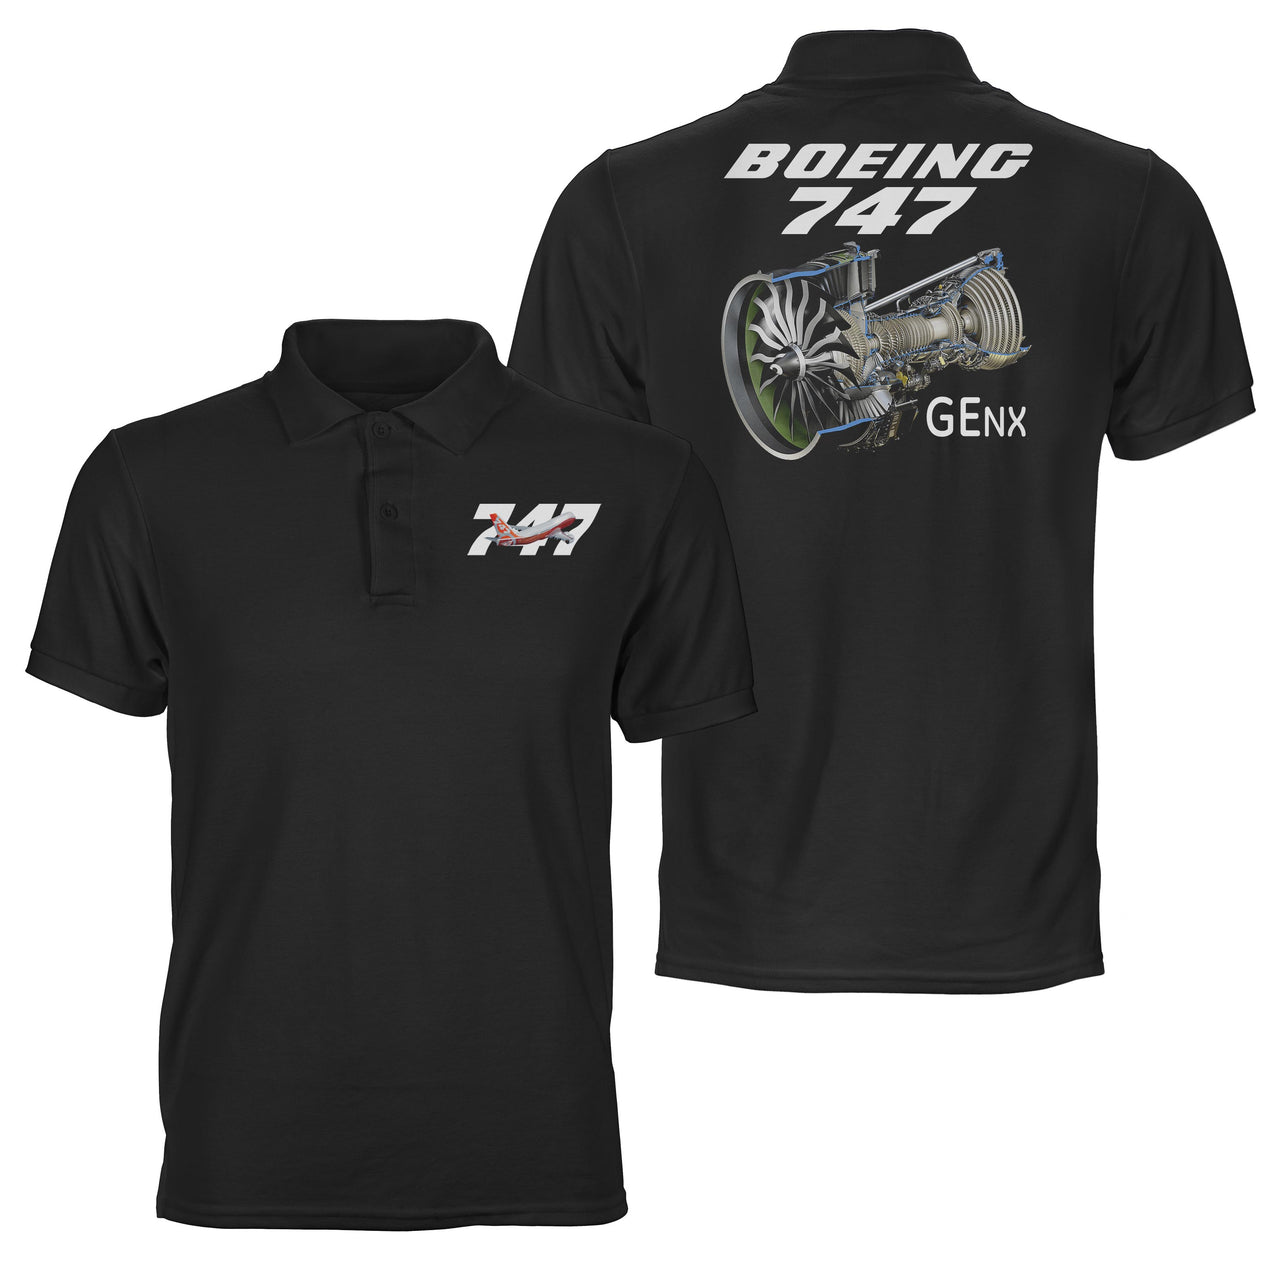 Boeing 747 & GENX Engine Designed Double Side Polo T-Shirts